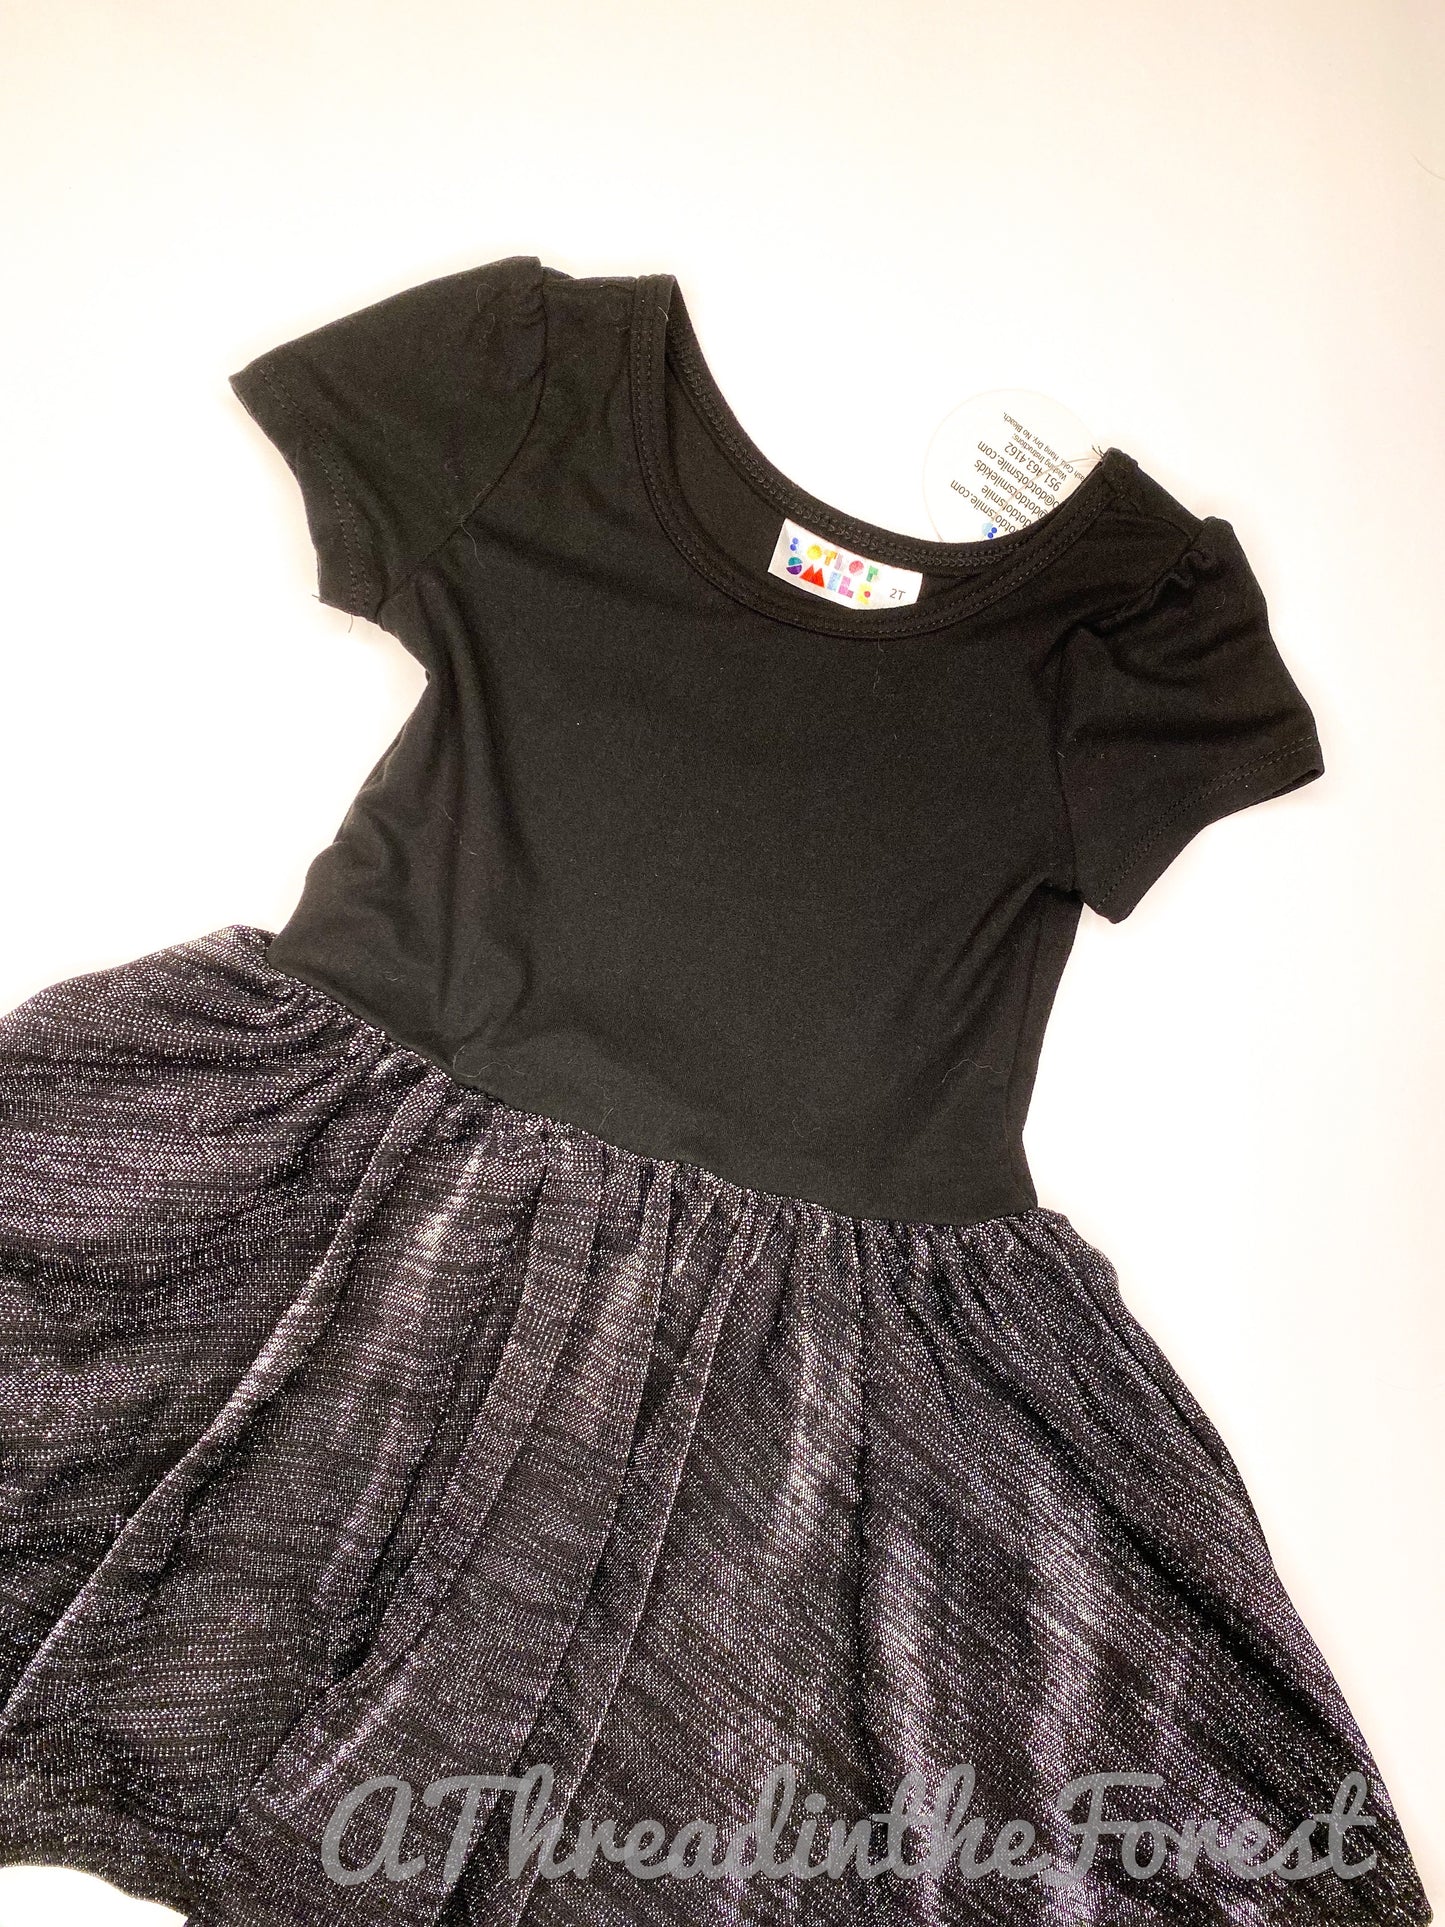 Black and Silver Dress Size 2T - Fancy Classic Cap Style Dress